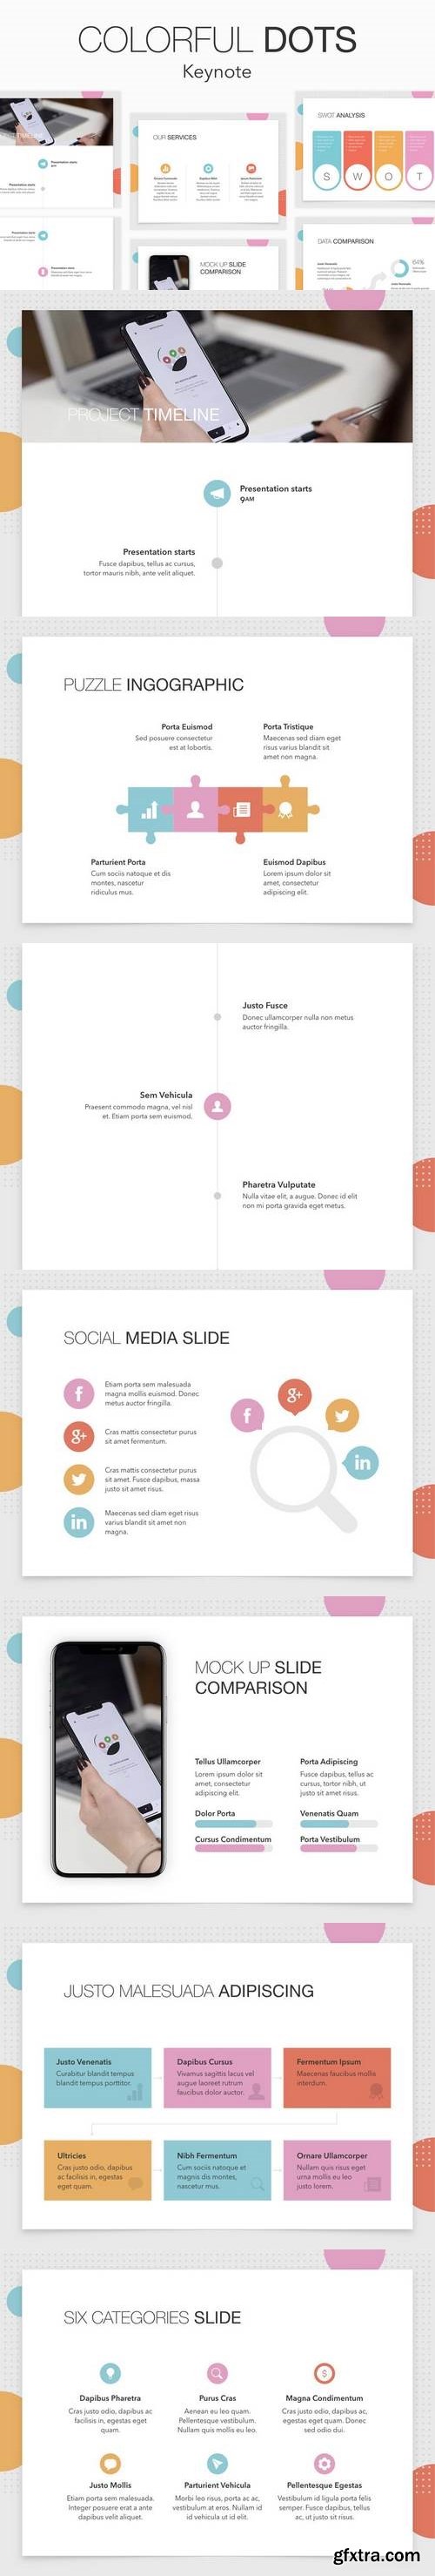 Colorful Dots Keynote Template